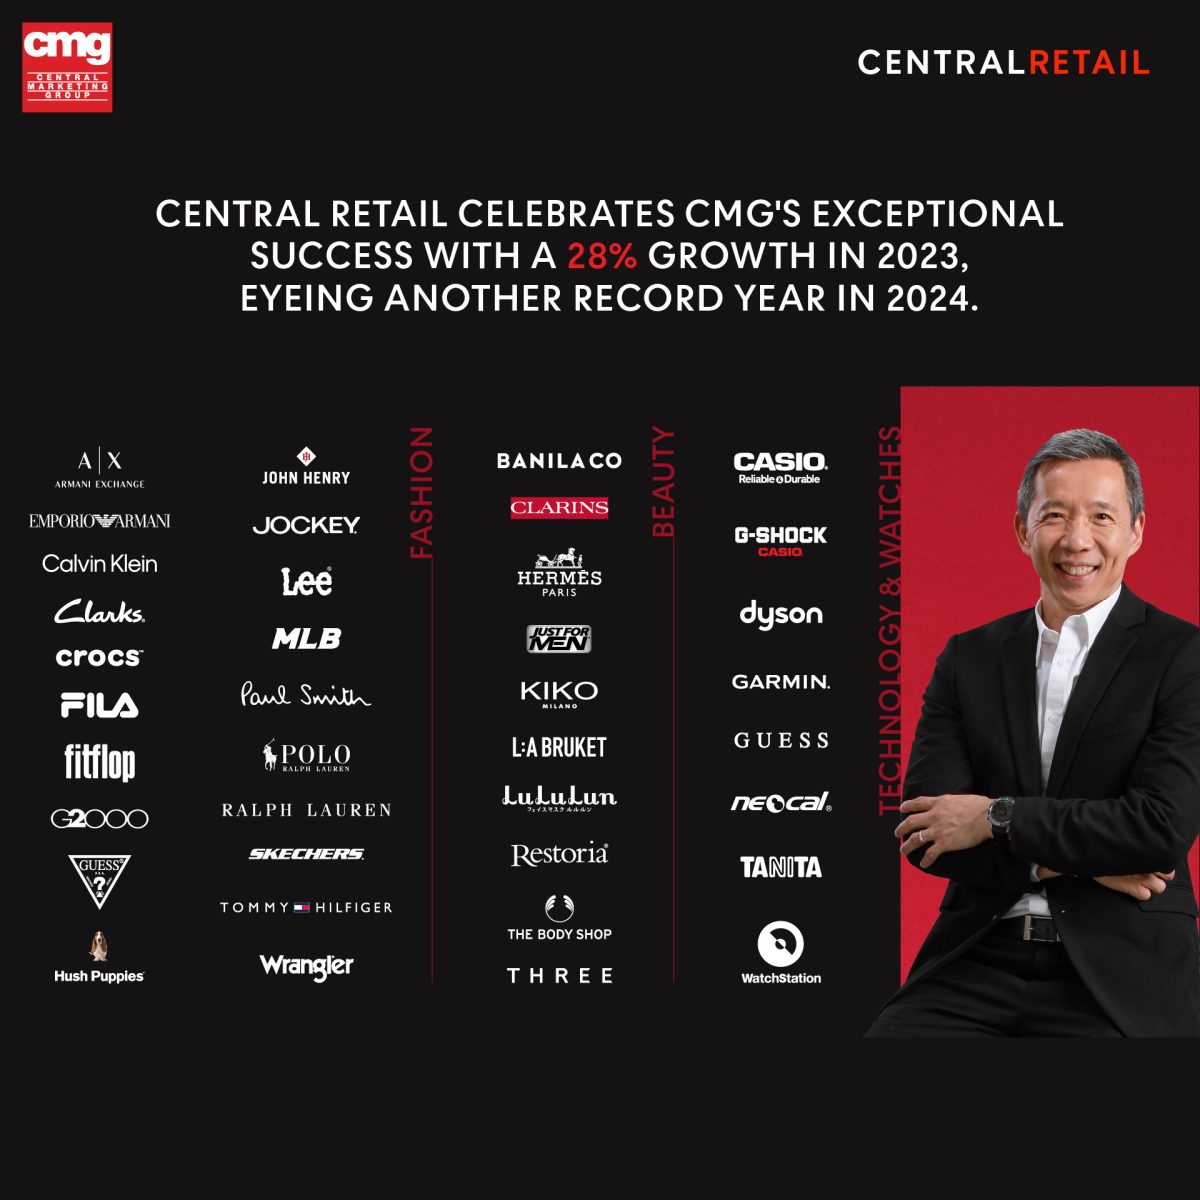 Central Retail celebrates CMG's exceptional success with a 28% growth in 2023, eyeing another record year in